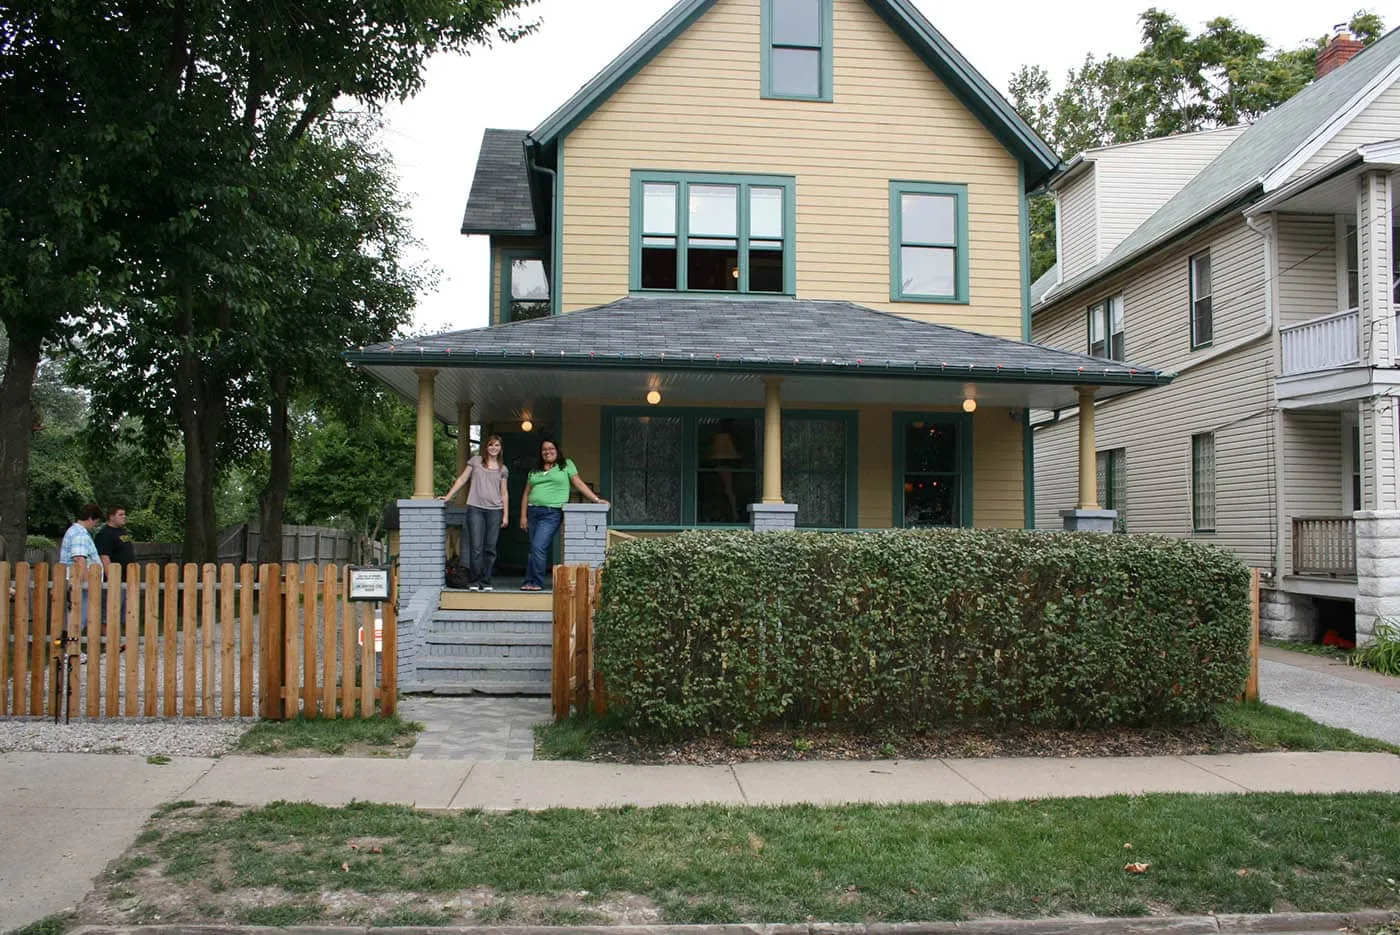 A Christmas Story House in Cleveland, Ohio